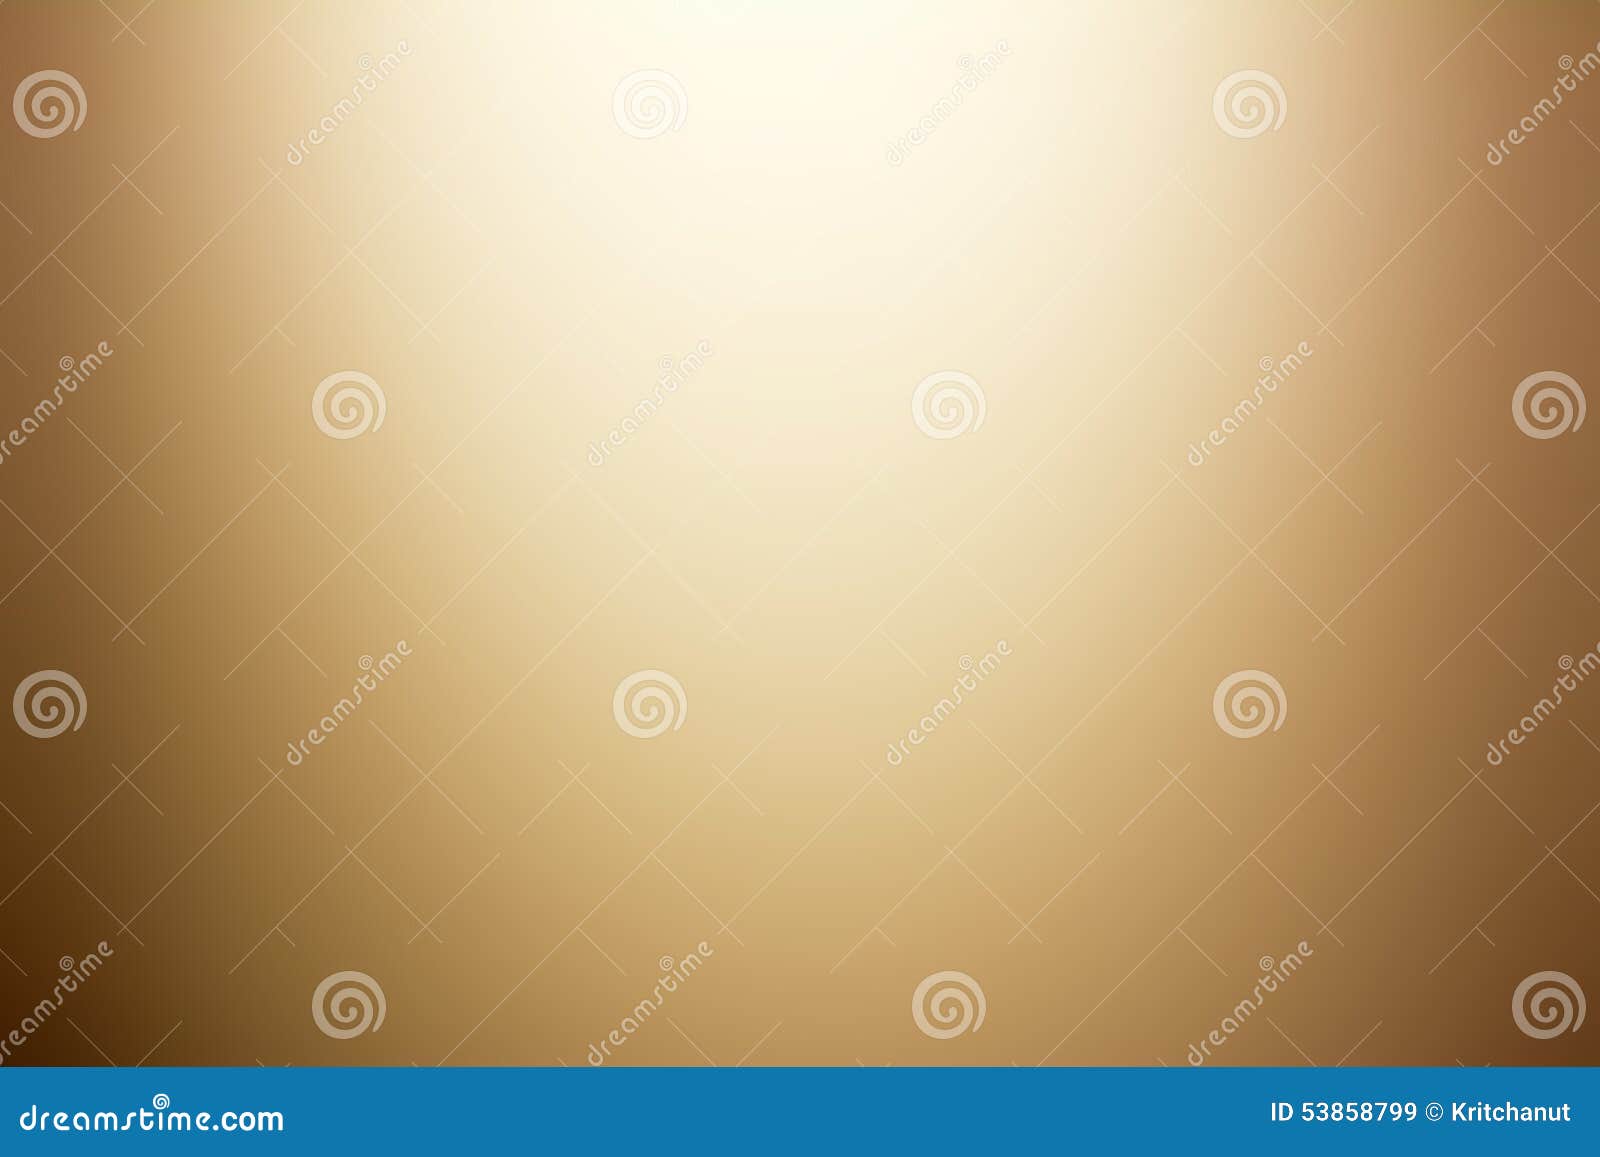 light brown gradient abstract background